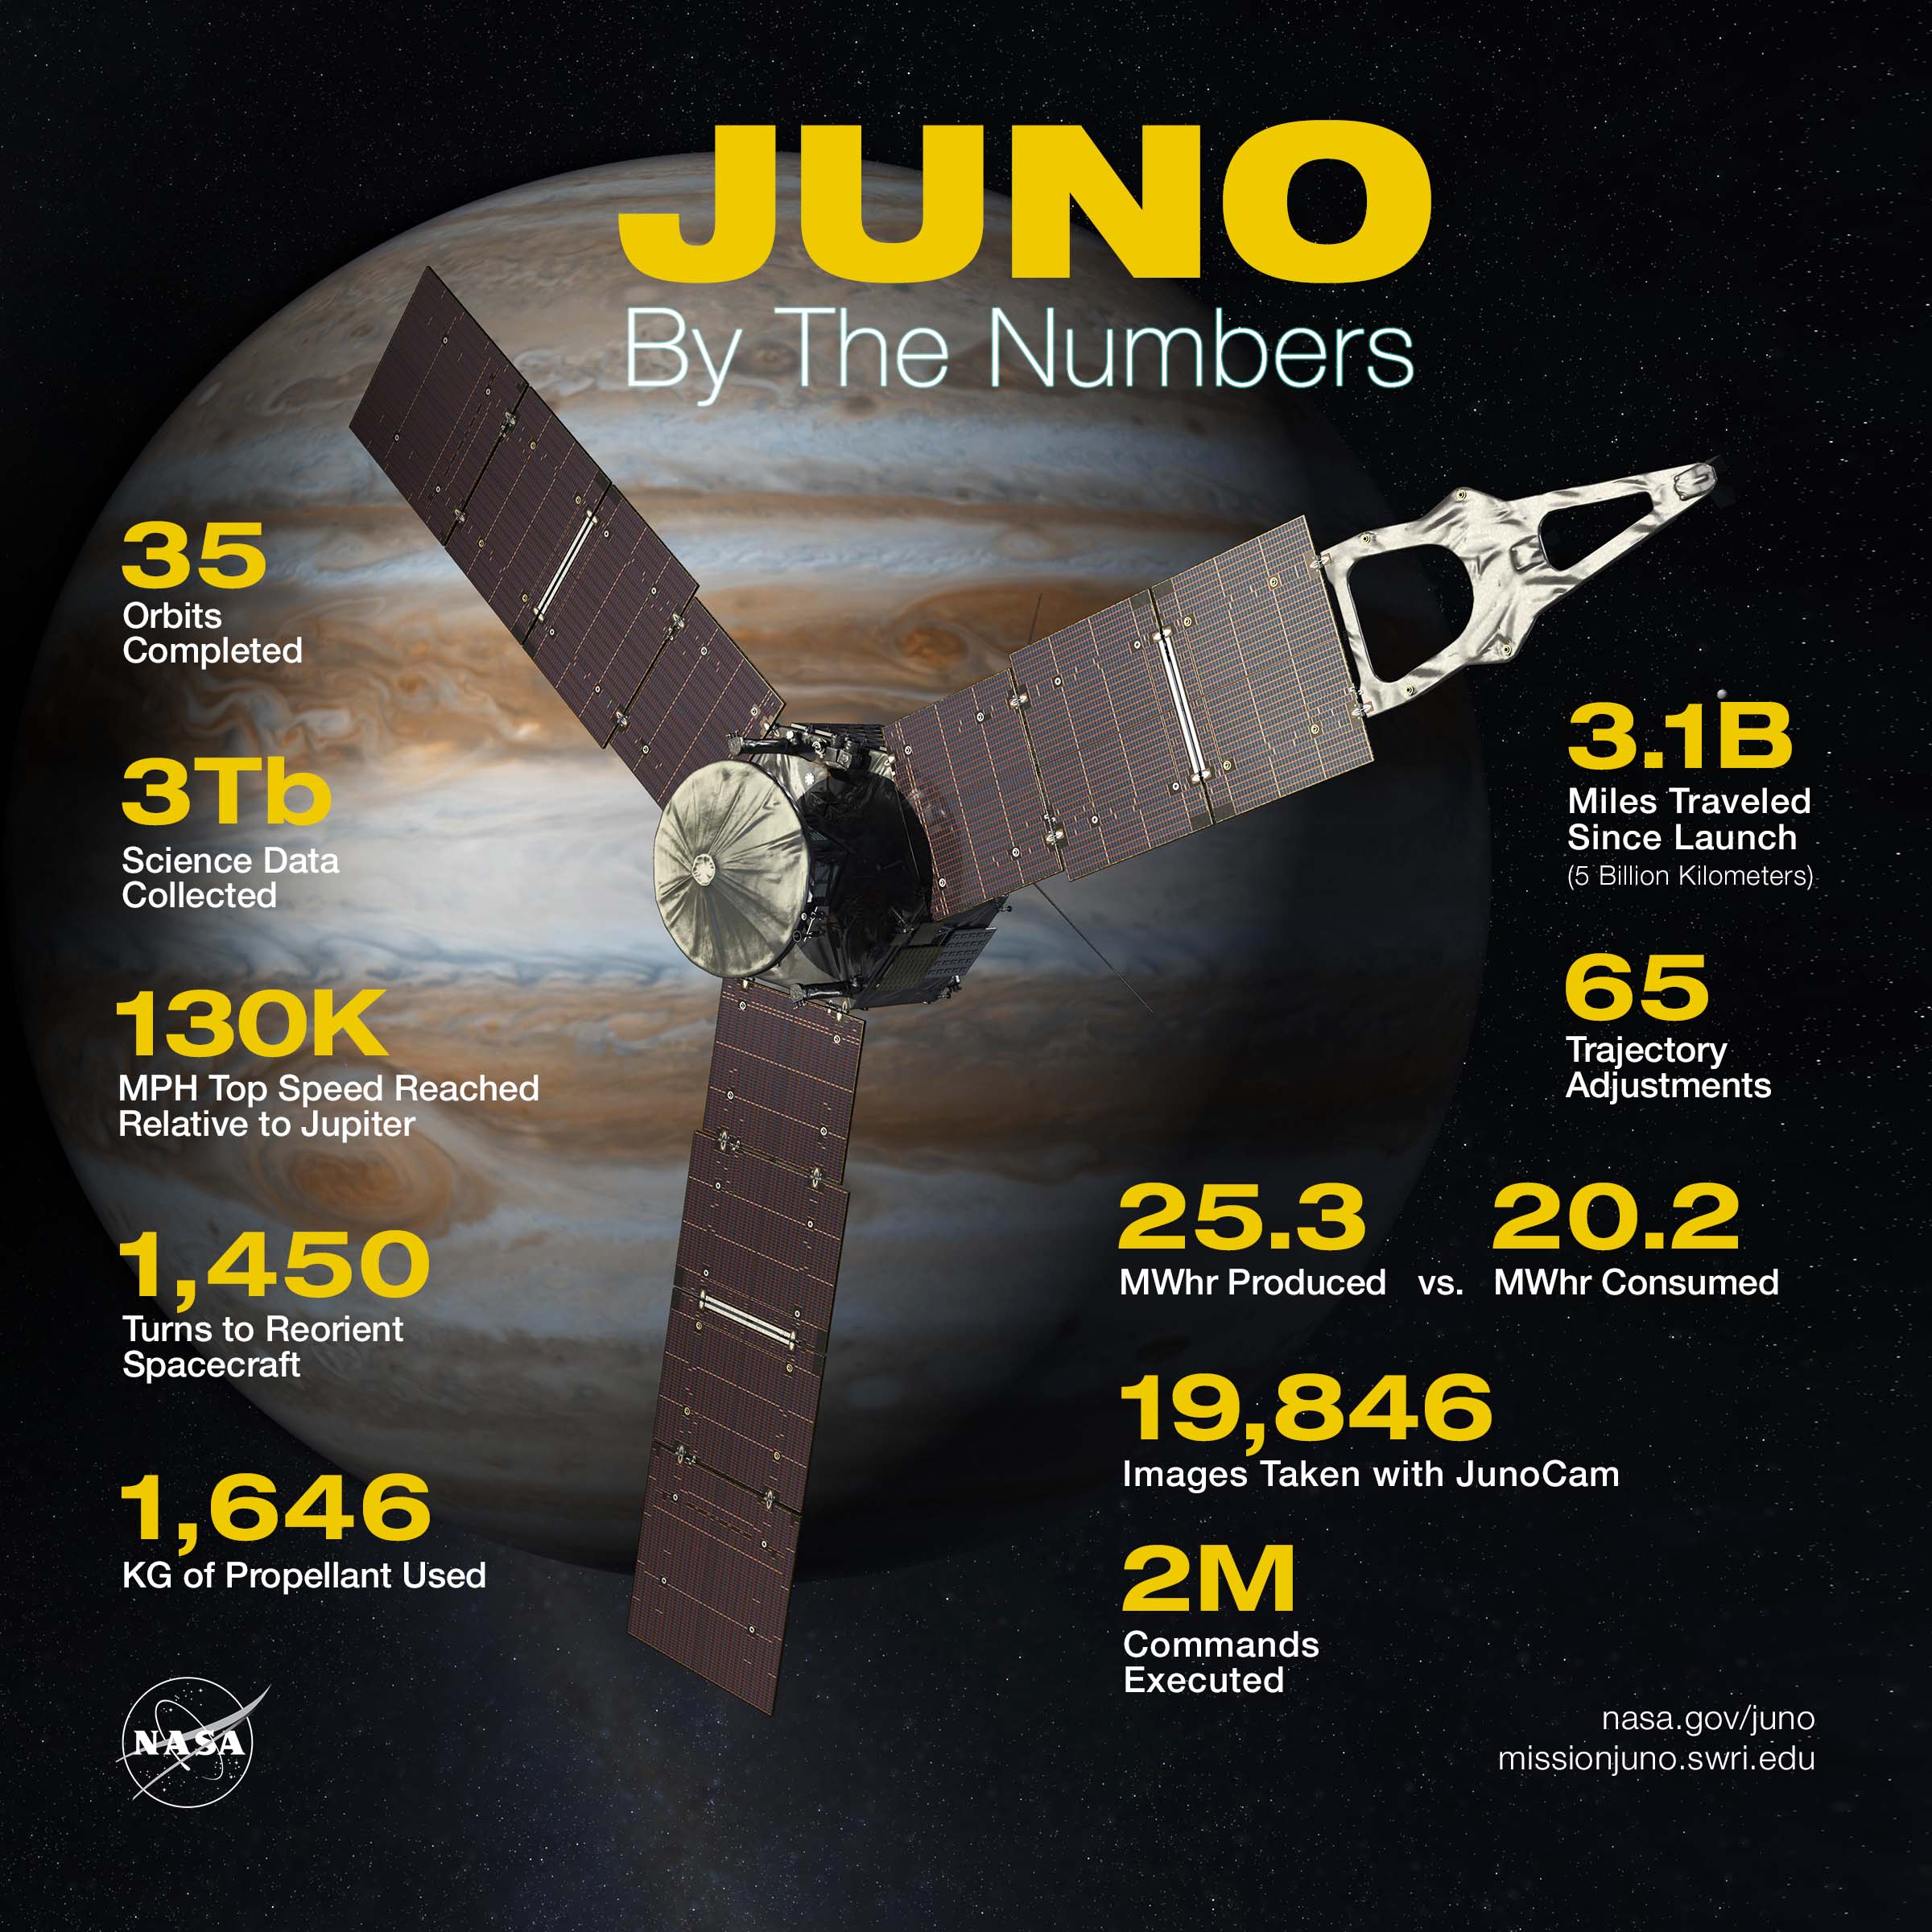 NASA Solar System on Twitter: "10 for 10: Ten years ago today, our #JunoMission launched. 🚀 Below is a thread of 10 waypoints and highlights from the journey to Jupiter — so